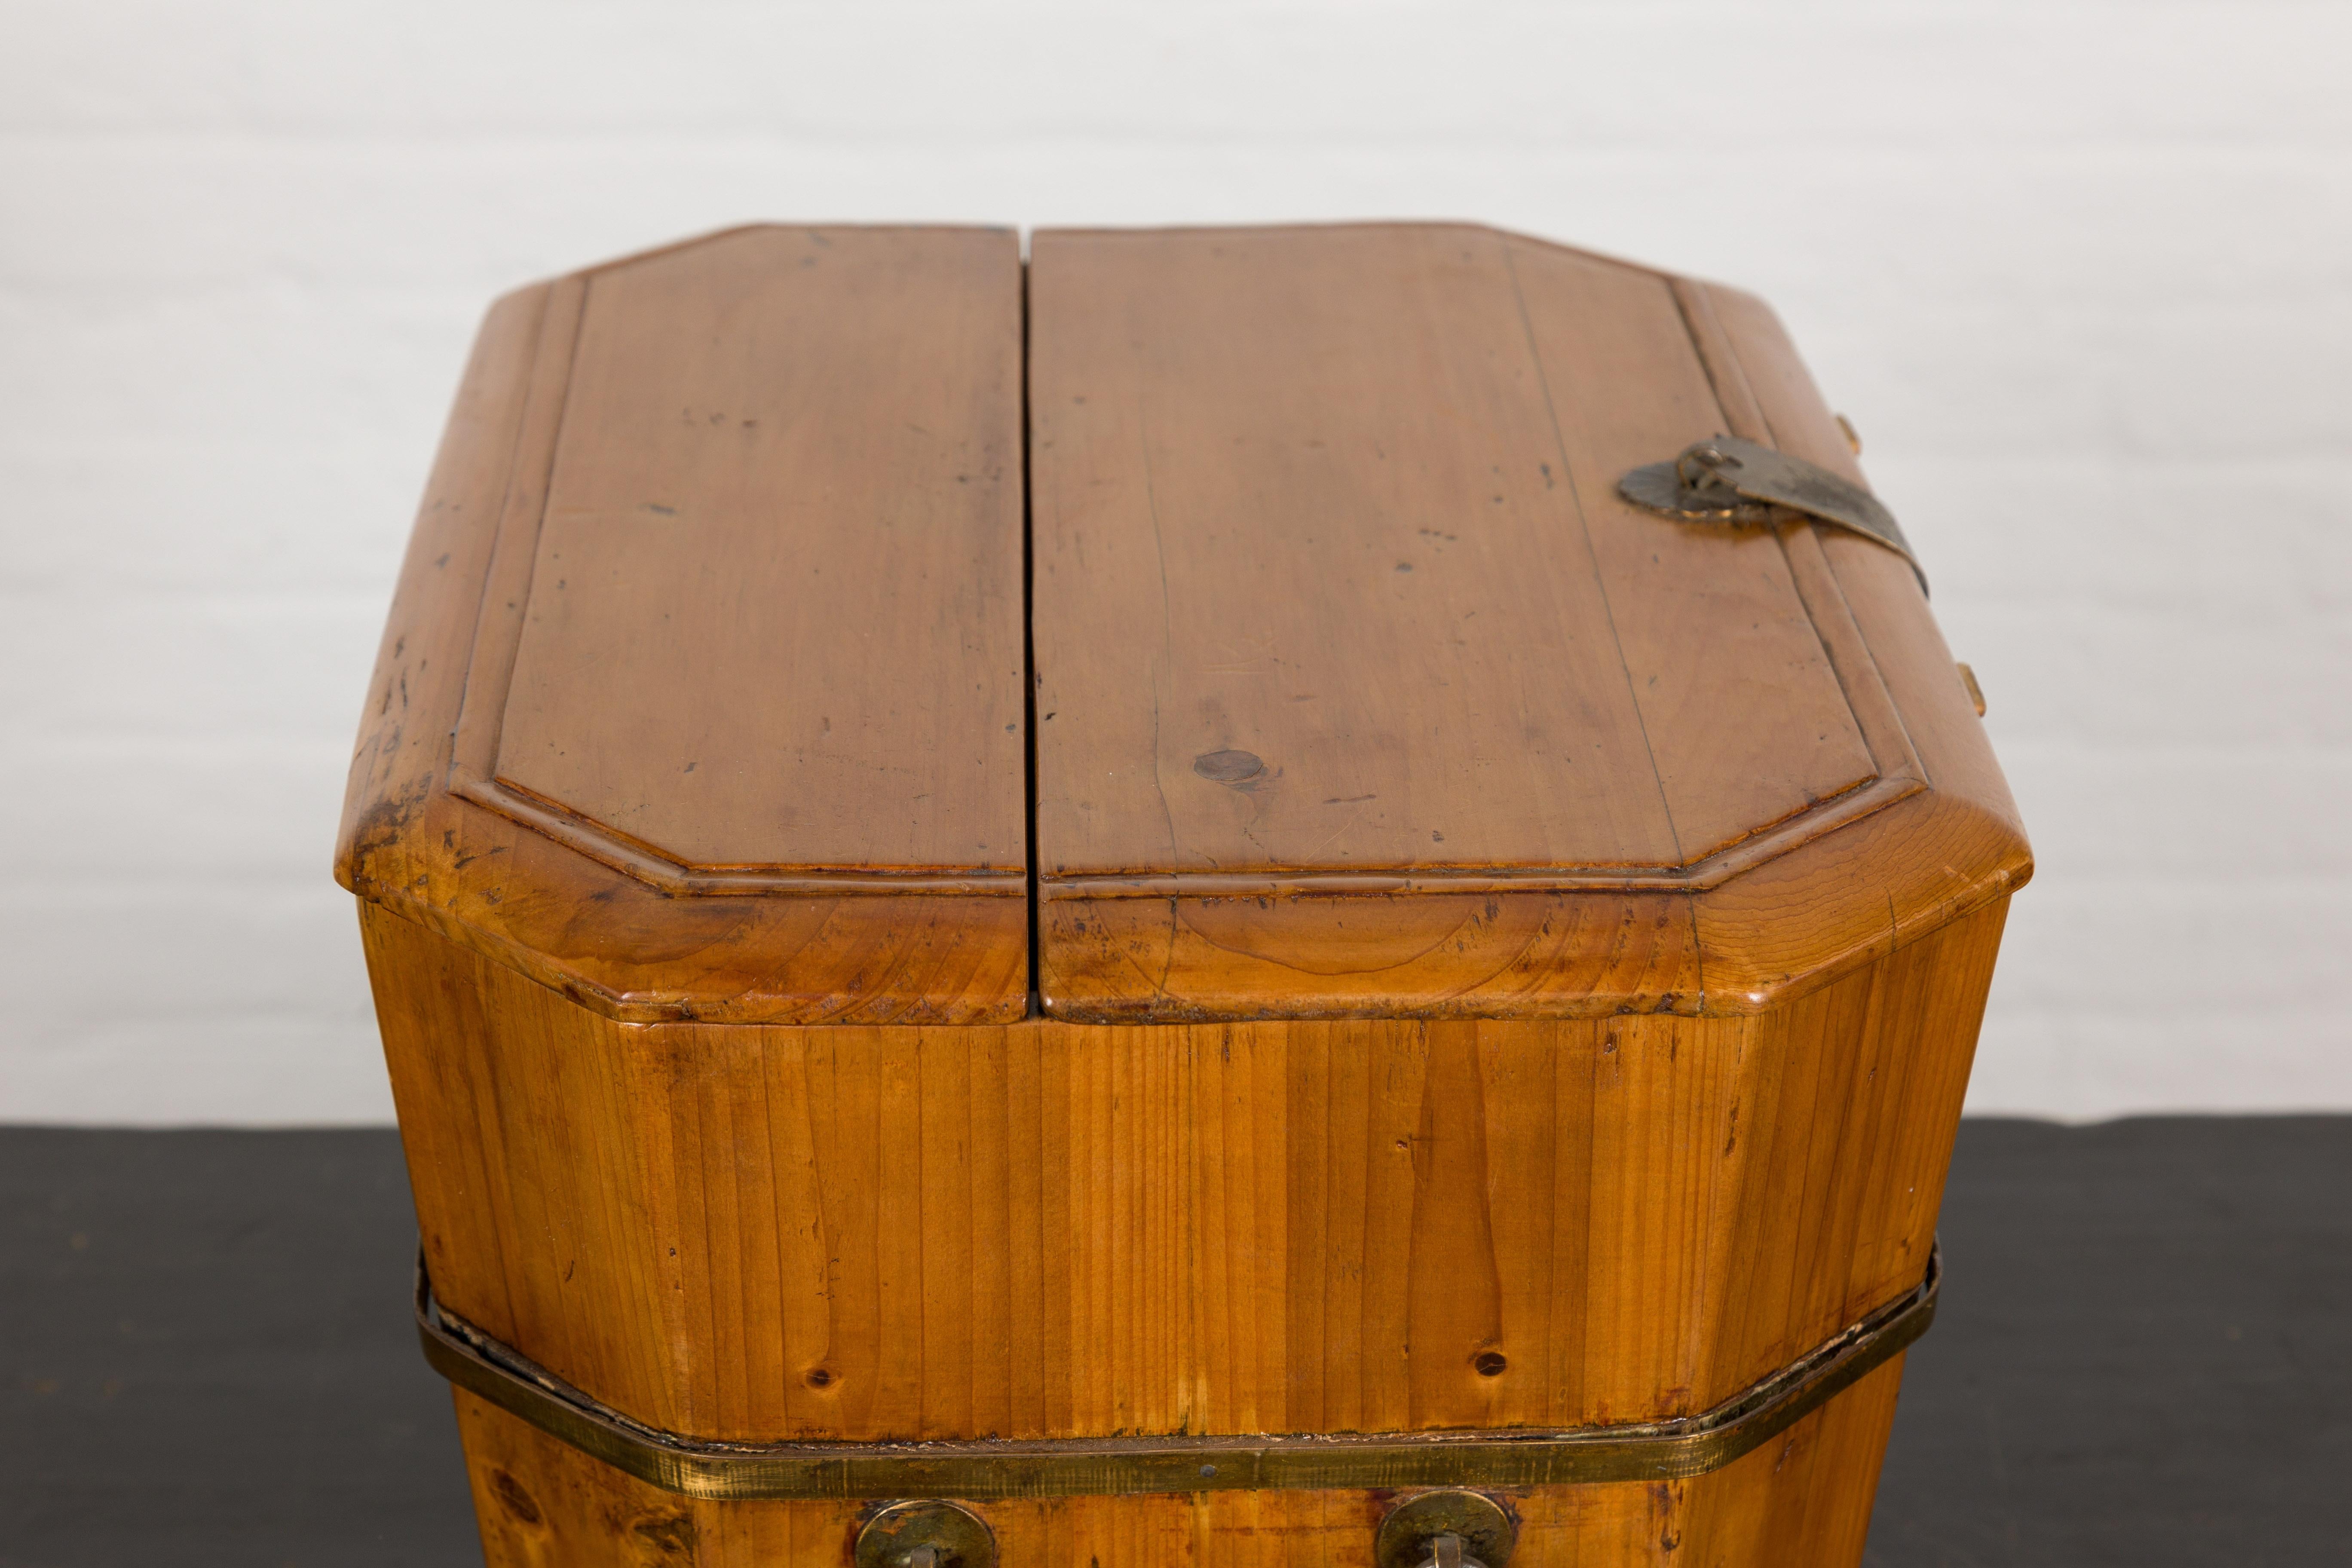 Late Qing Dynasty Wood and Brass Lidded Box with Lateral Handles For Sale 10